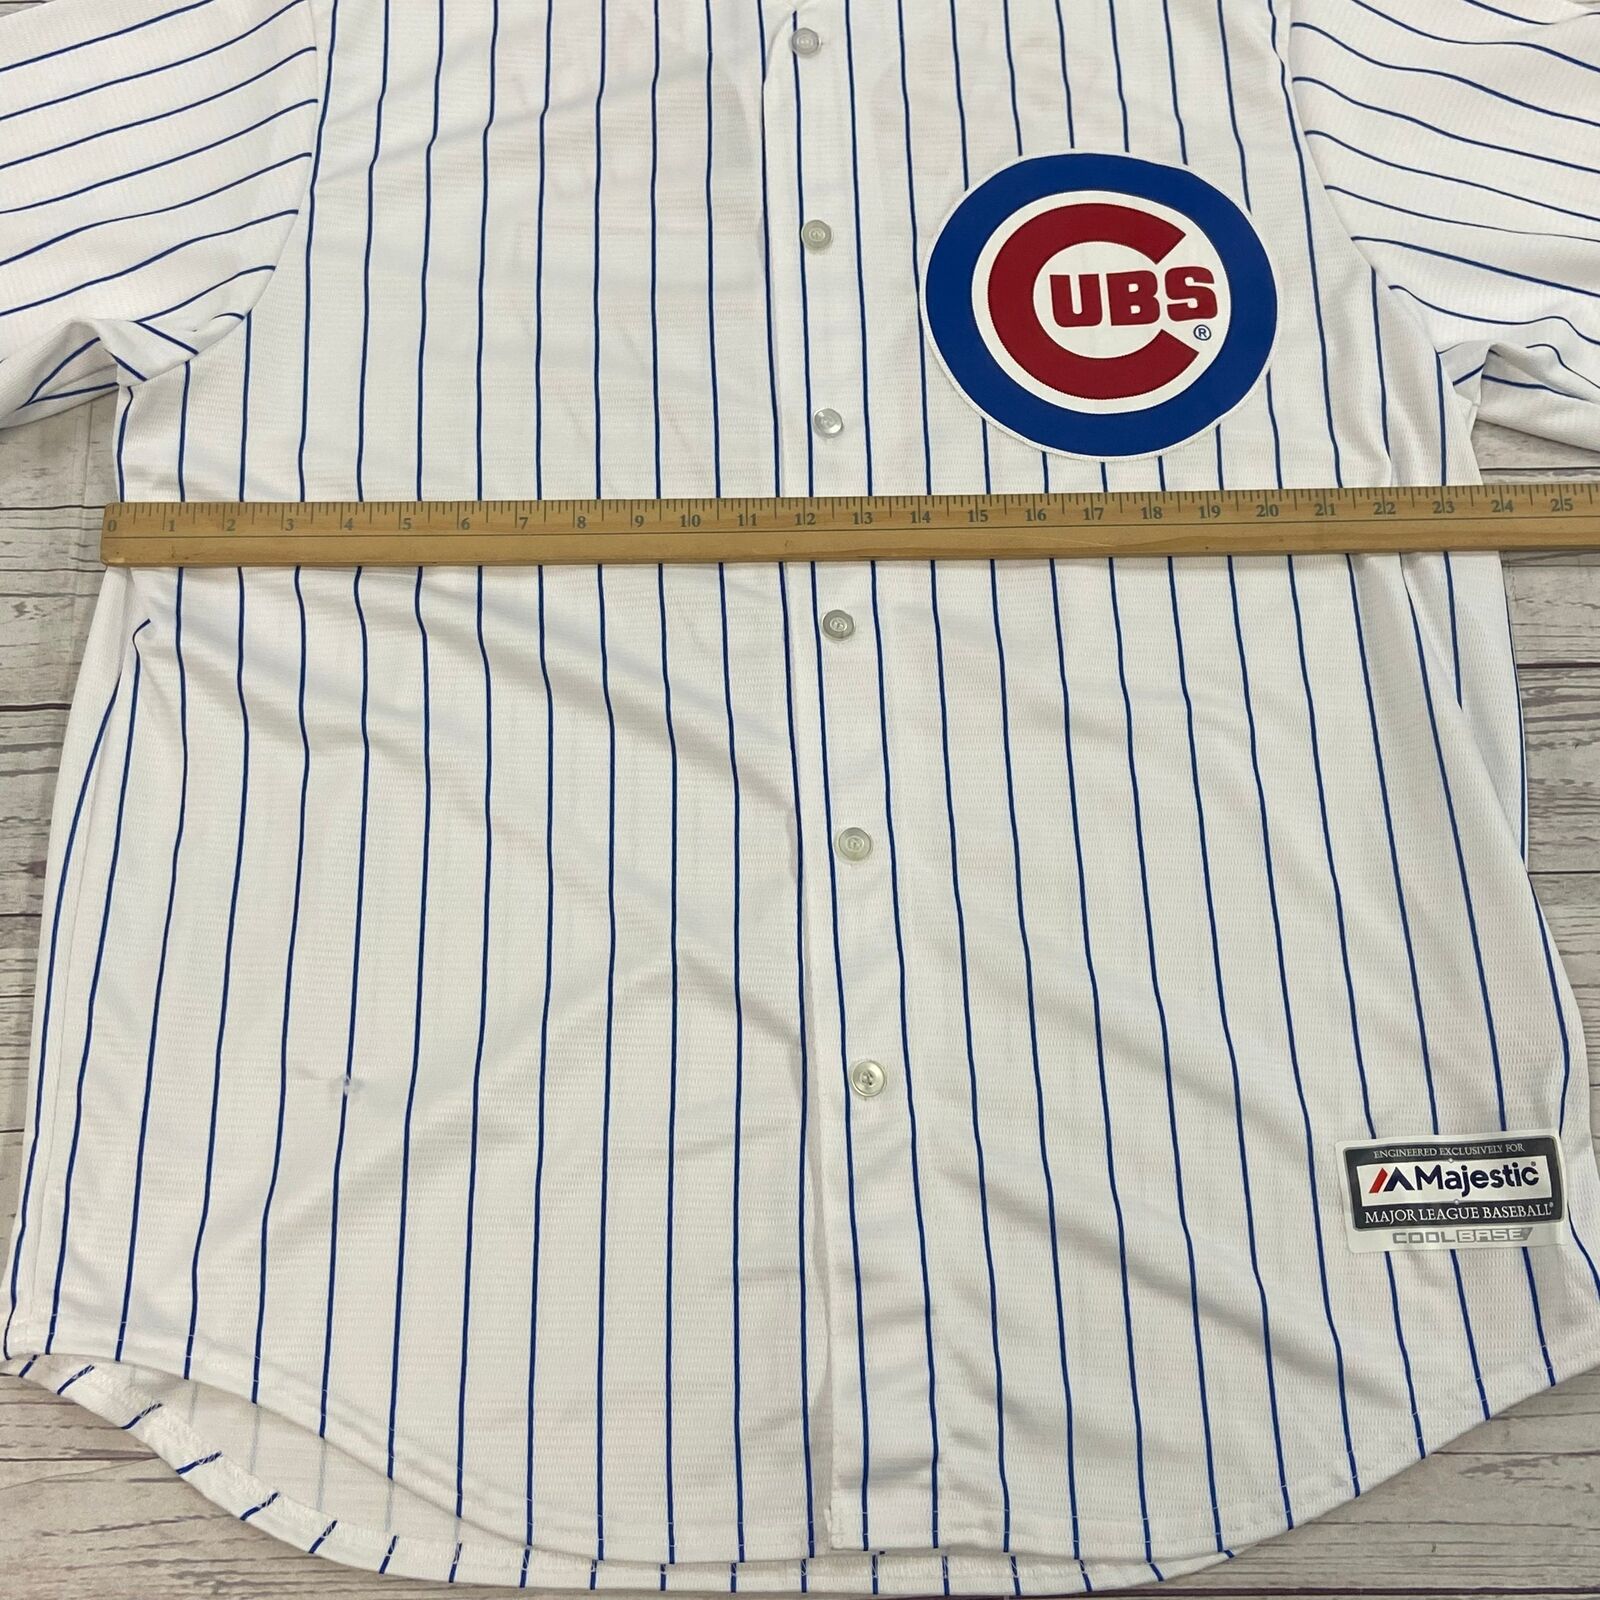 Majestic Embroidered Chicago Cubs MLB NHL Hockey Jersey • #17 Bryant • RARE